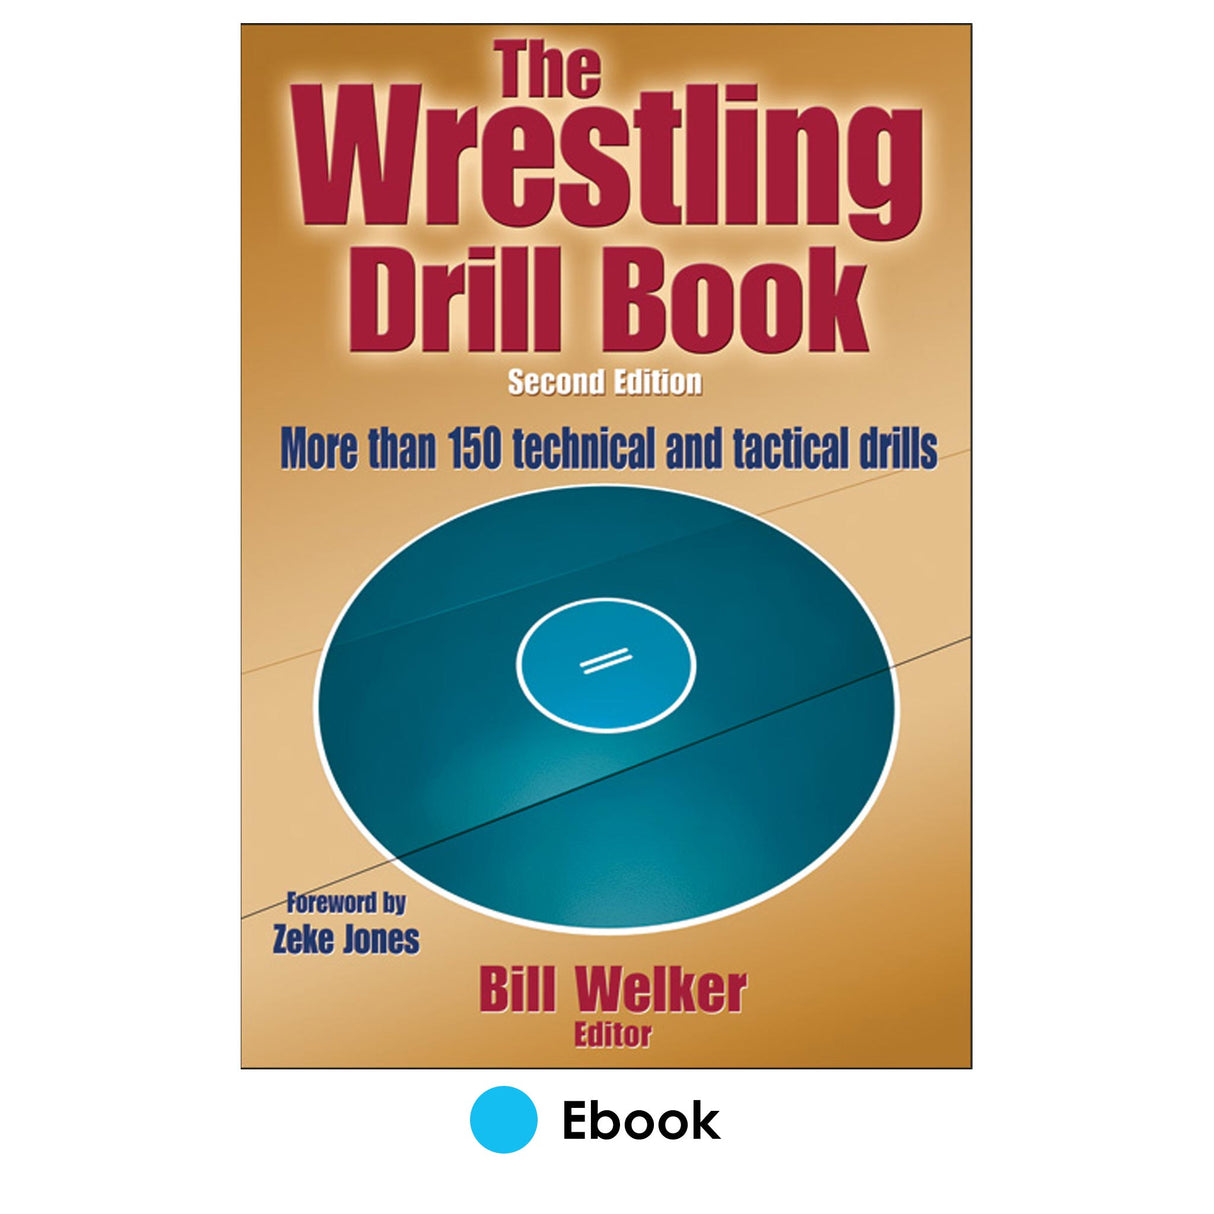 Wrestling Drill Book 2nd Edition PDF, The